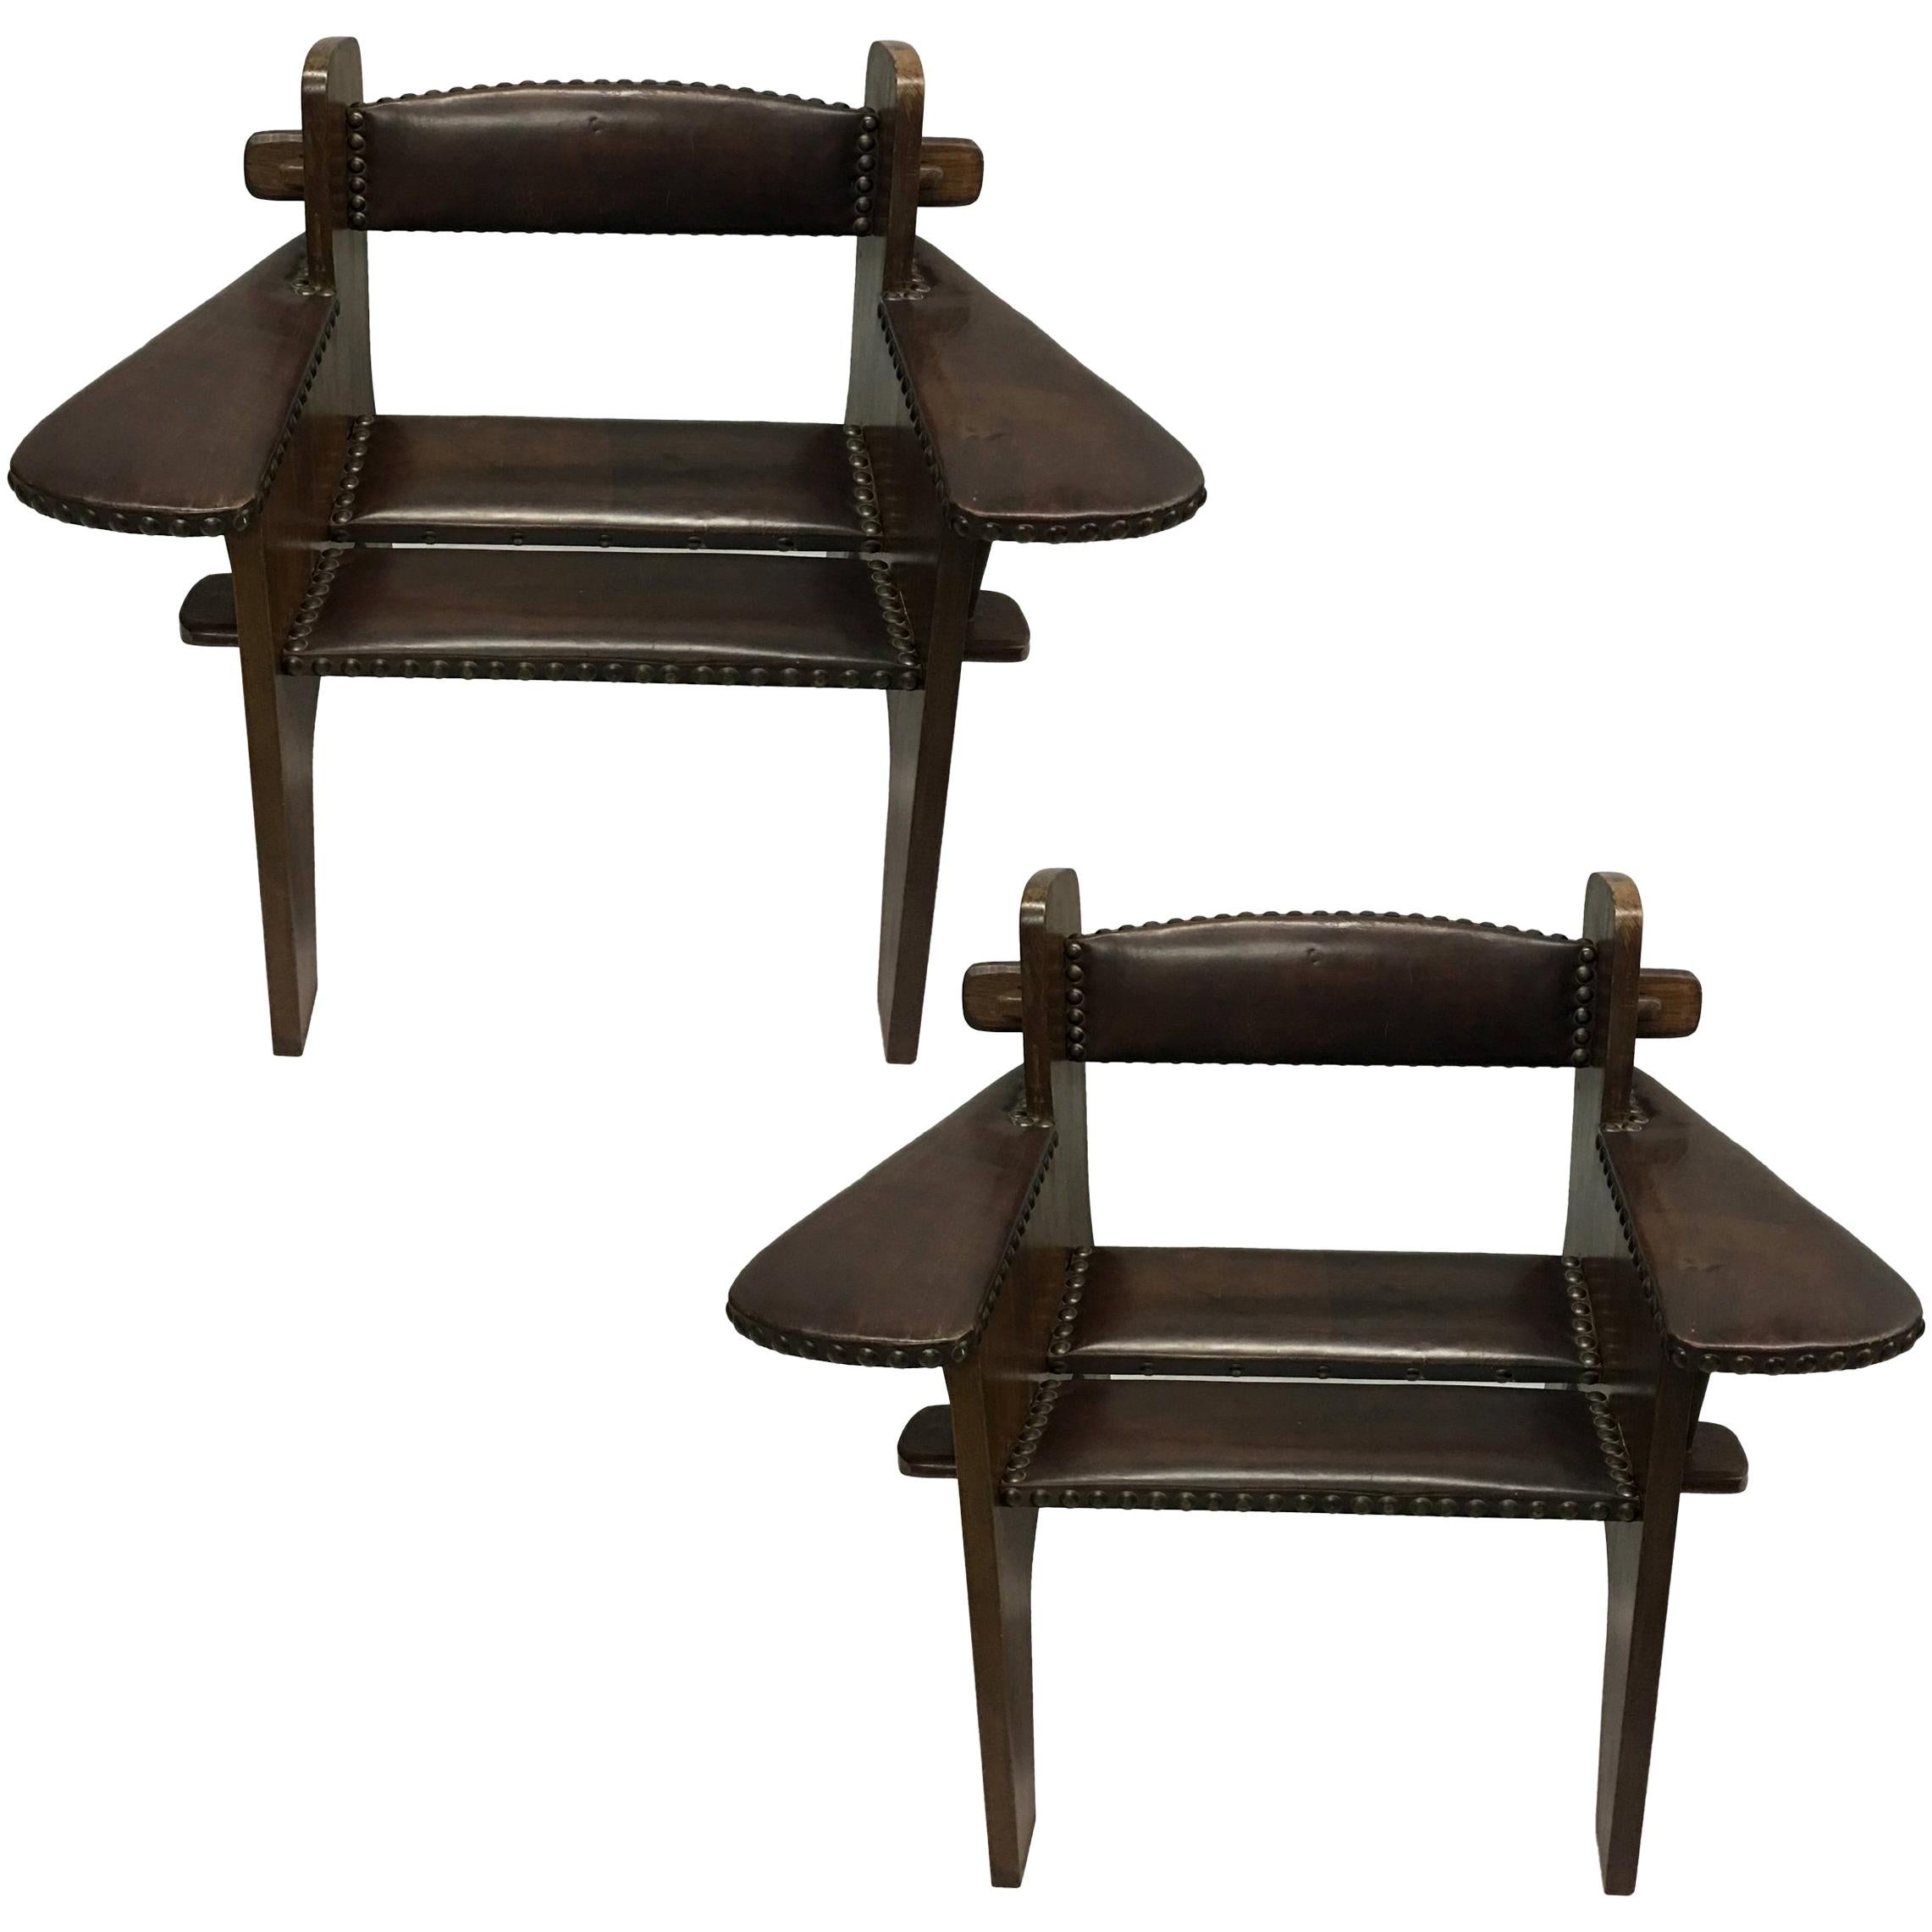 Pair of Italian Futurist Wood & Leather Lounge Chairs, Giacomo Balla Attributed For Sale